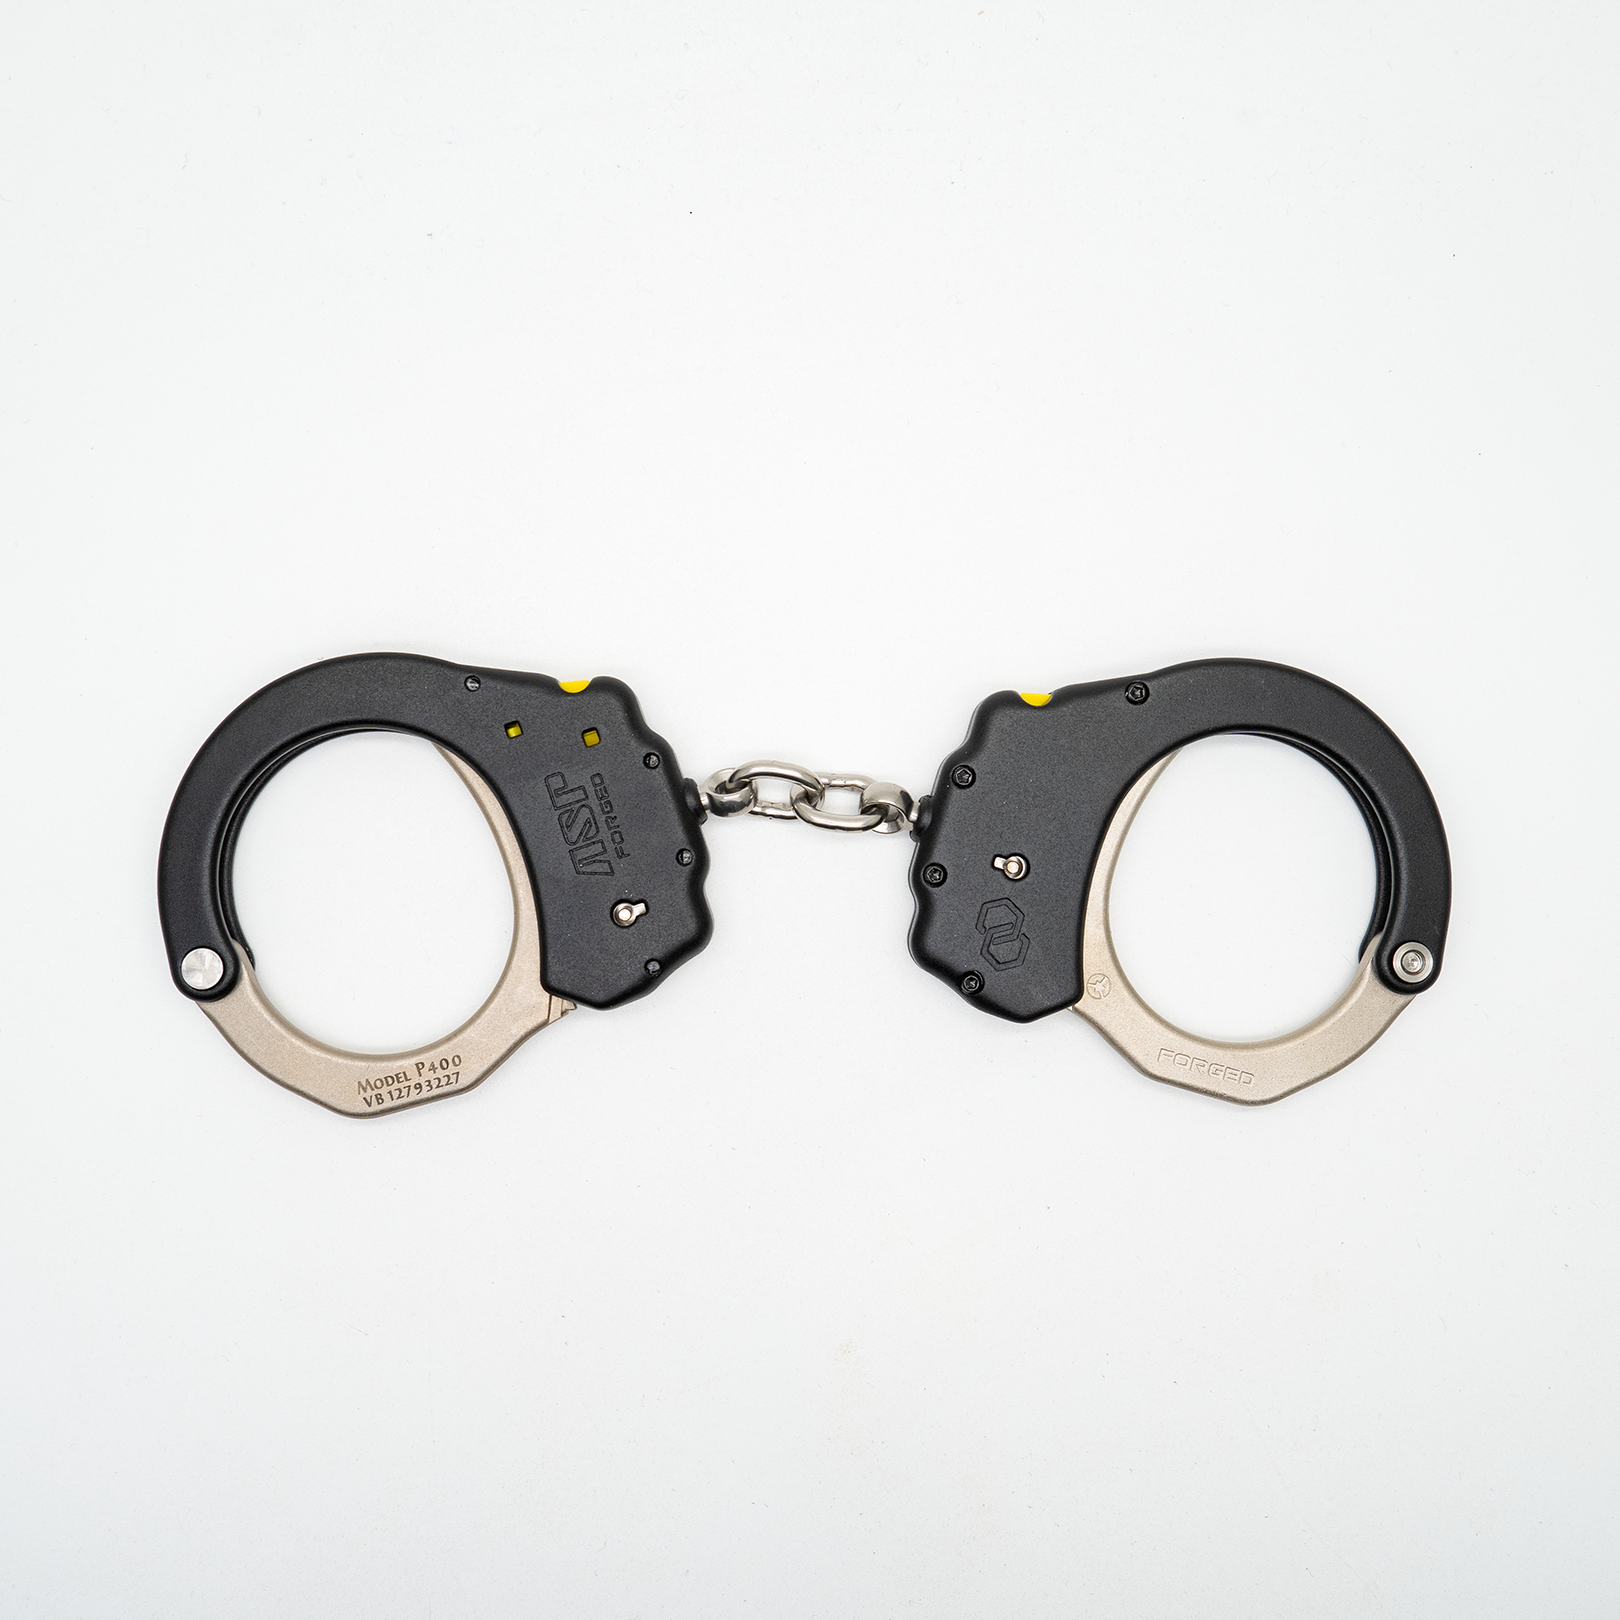 ASP - Chain Ultra PLUS Handcuffs(Steel)-Black,1 Pawl(Yellow Tactical)